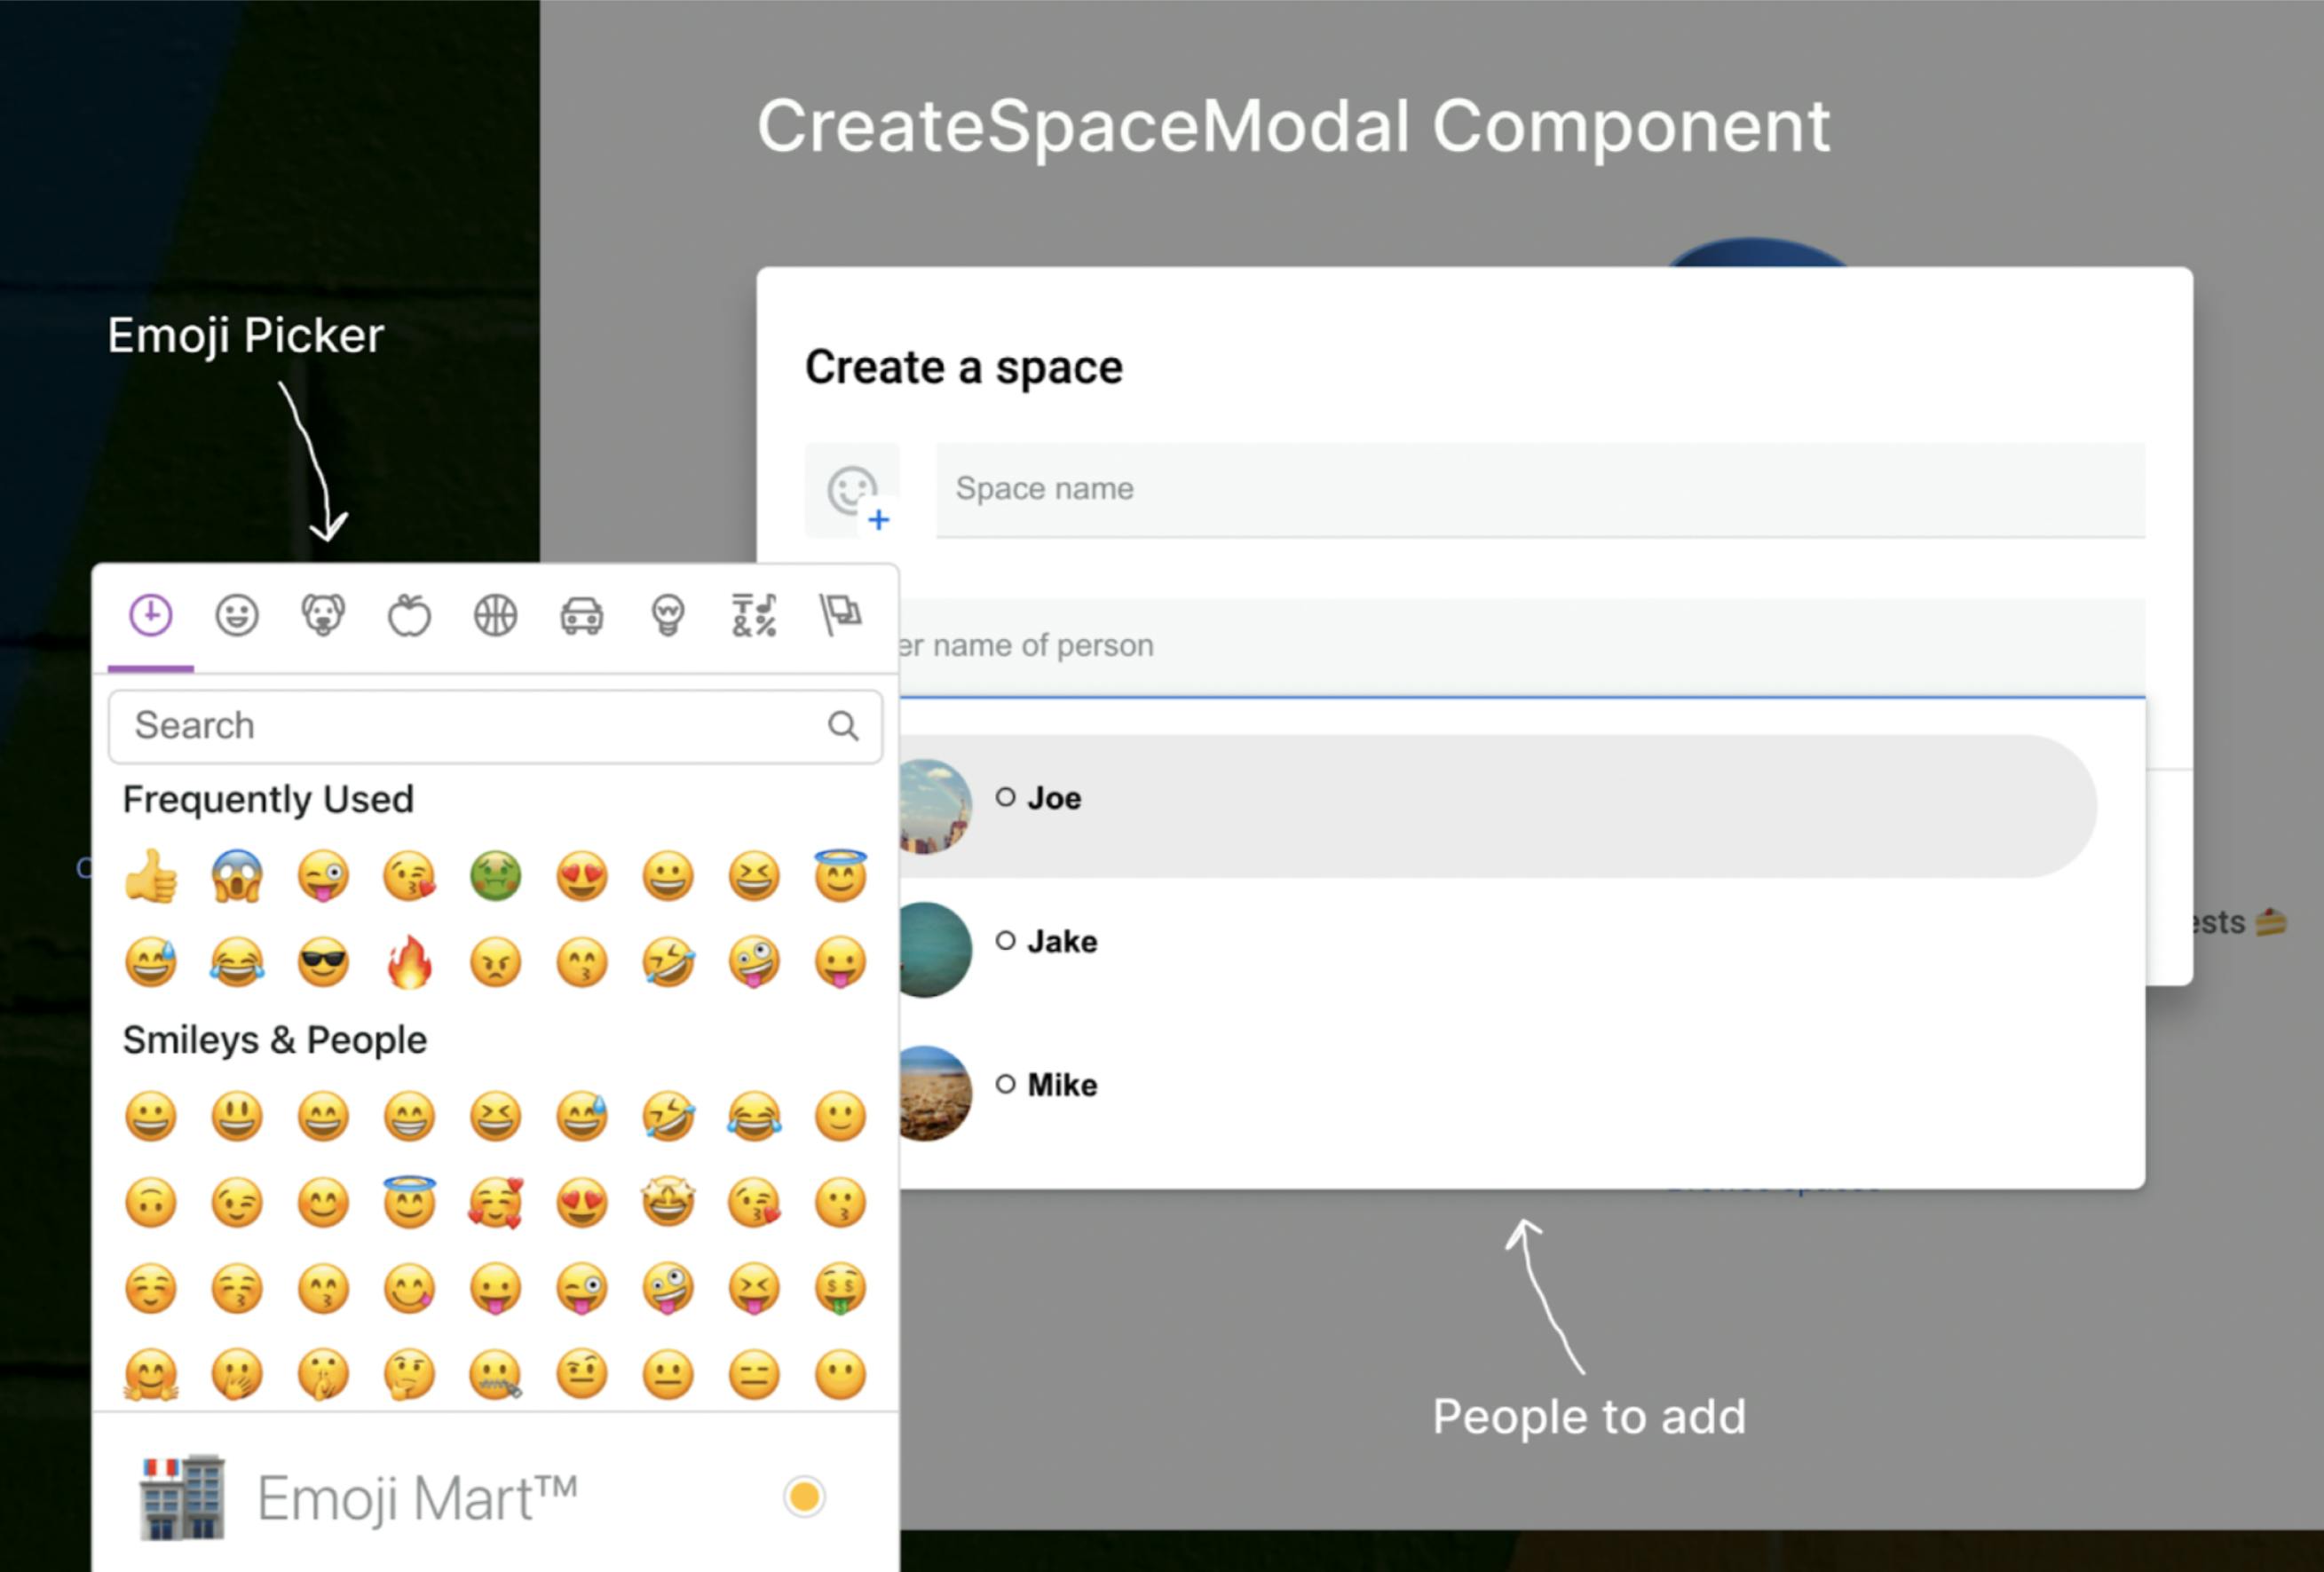 CreateSpaceModal Component which the reader will build